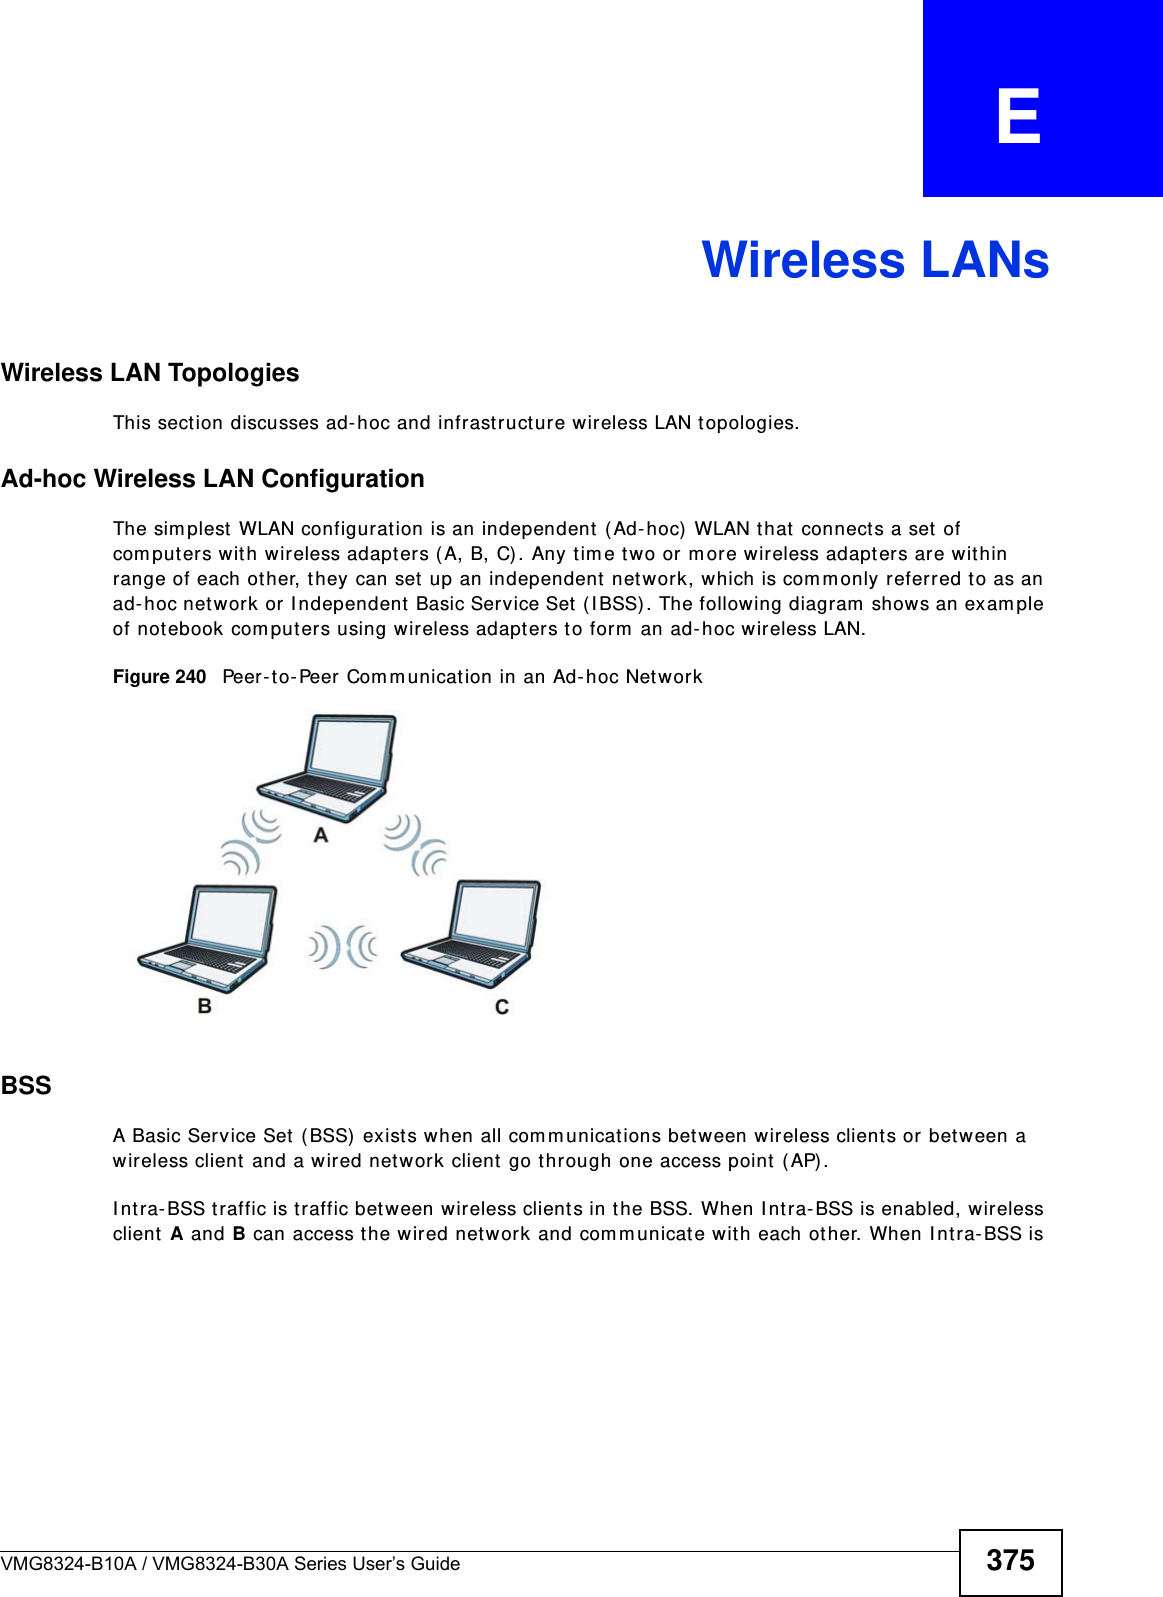 VMG8324-B10A / VMG8324-B30A Series User’s Guide 375APPENDIX   EWireless LANsWireless LAN TopologiesThis section discusses ad- hoc and infrastruct ure wireless LAN topologies.Ad-hoc Wireless LAN ConfigurationThe sim plest WLAN configurat ion is an independent  ( Ad- hoc)  WLAN that connects a set  of com puters wit h wireless adapt ers (A, B, C) . Any t im e t wo or m ore wireless adapters are wit hin range of each other, they can set up an independent  net work, which is com m only referred to as an ad- hoc net work or I ndependent Basic Service Set (I BSS) . The following diagram  shows an exam ple of not ebook com put ers using wireless adapt ers to form  an ad-hoc wireless LAN. Figure 240   Peer- to- Peer Com m unicat ion in an Ad- hoc Net workBSSA Basic Service Set ( BSS) exist s when all com m unicat ions bet ween wireless clients or between a wireless client and a wired network client go through one access point  ( AP). I ntra-BSS traffic is t raffic bet ween wireless clients in t he BSS. When I ntra-BSS is enabled, wireless client  A and B can access the w ired net w ork and com m unicat e wit h each ot her. When I nt ra- BSS is 